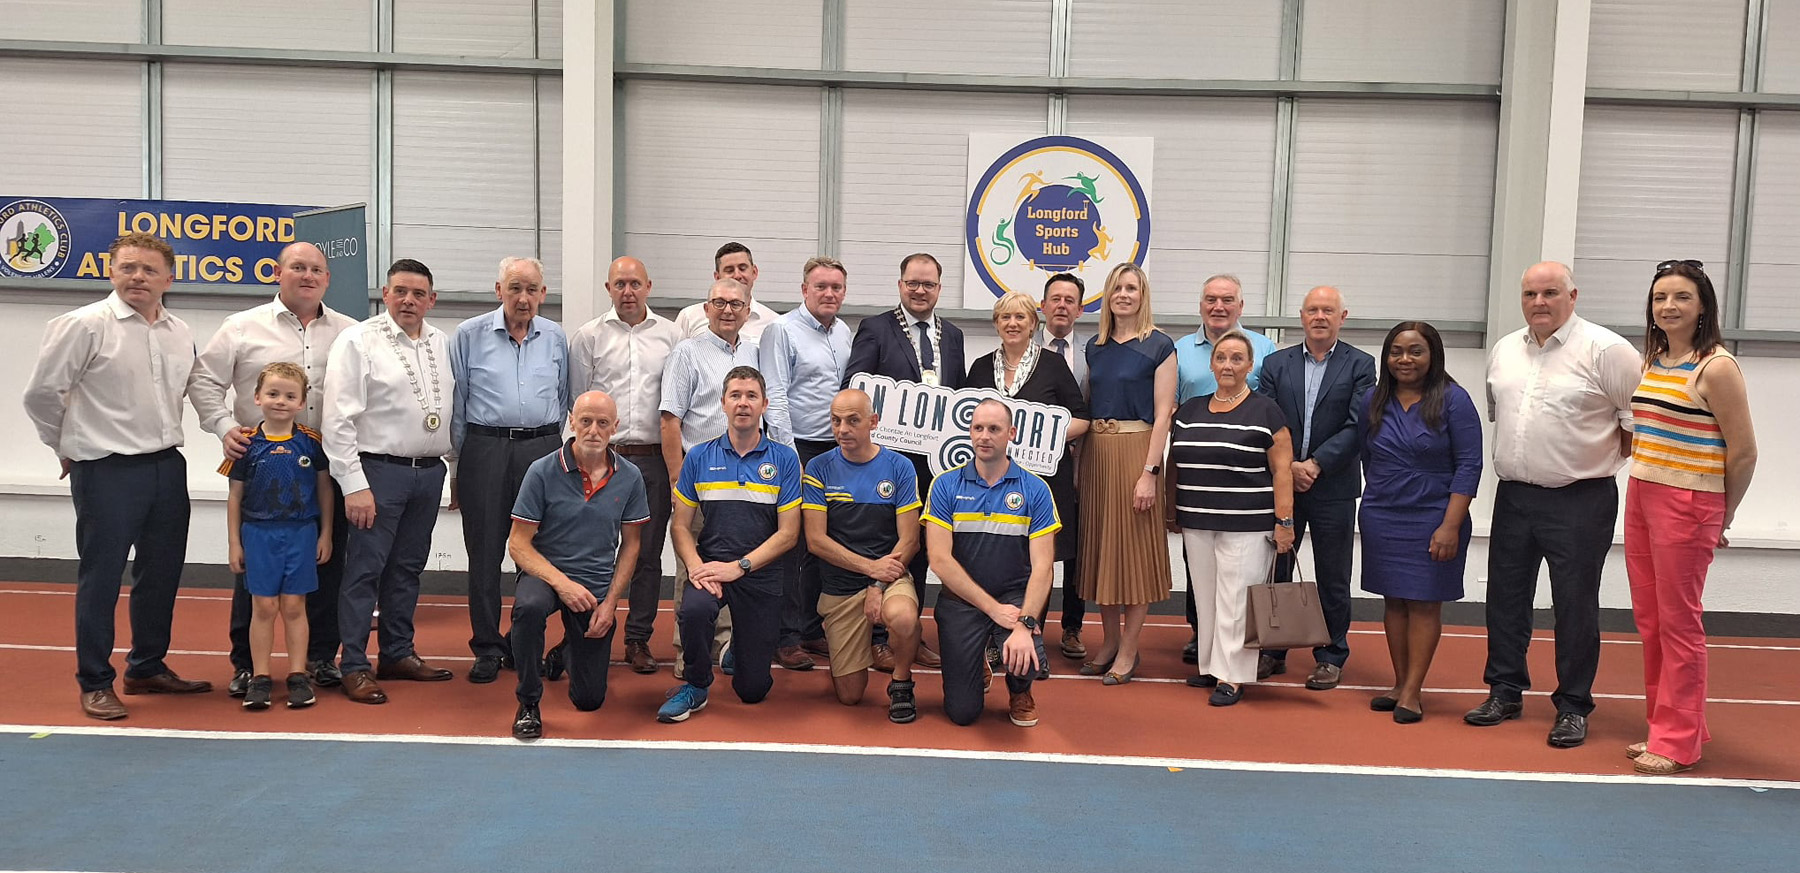 Opening of the Longford Athletics Centre